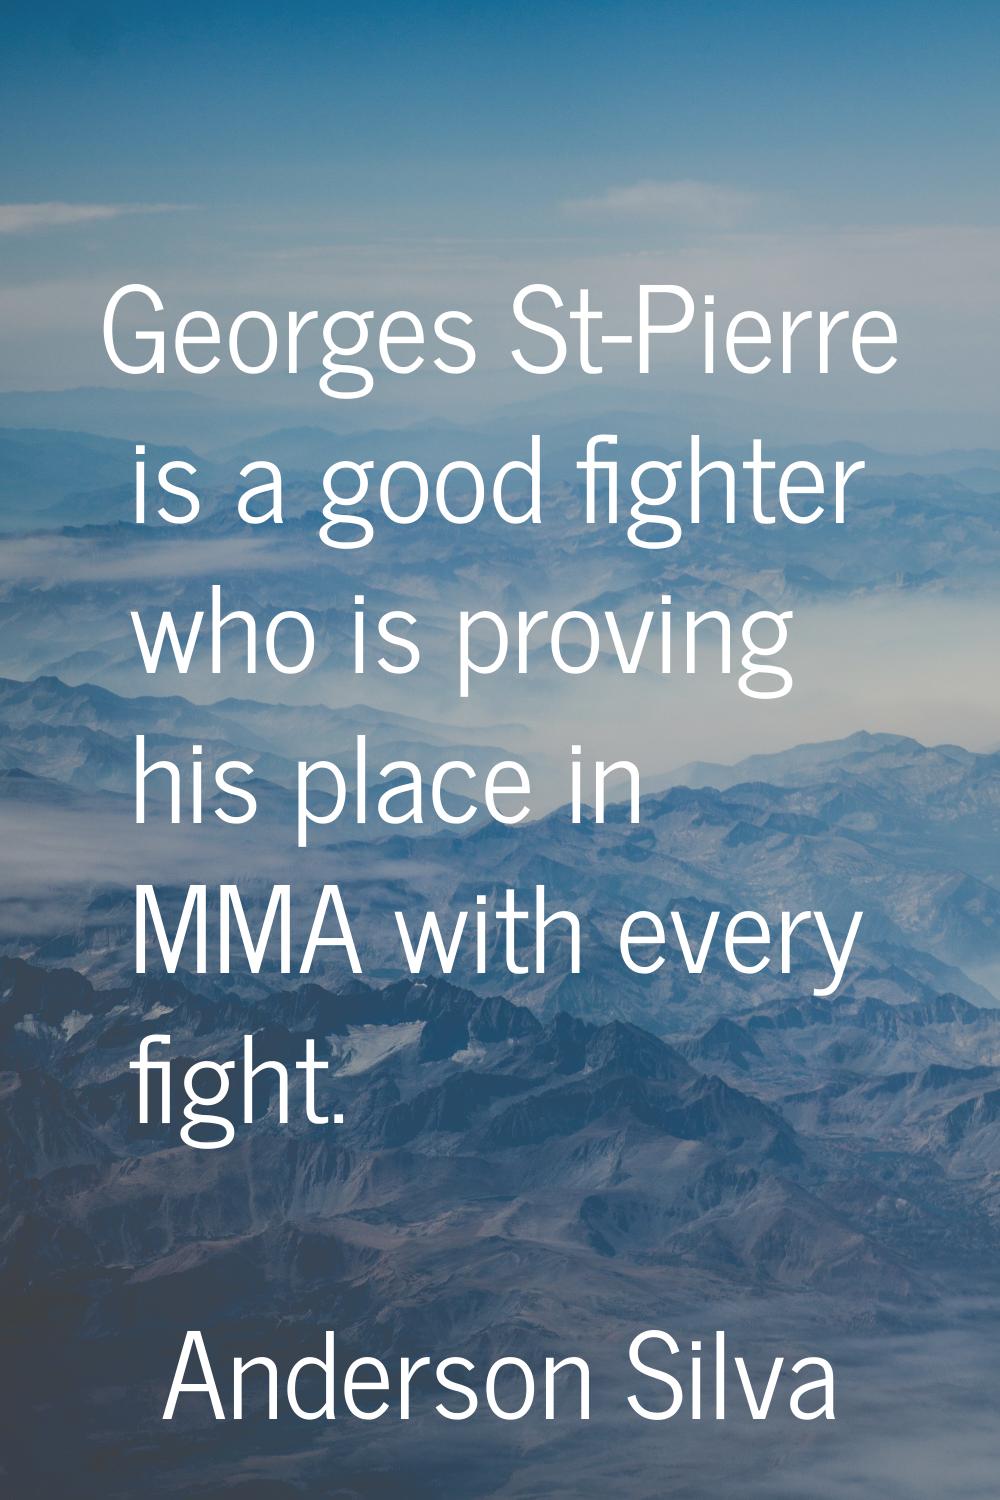 Georges St-Pierre is a good fighter who is proving his place in MMA with every fight.